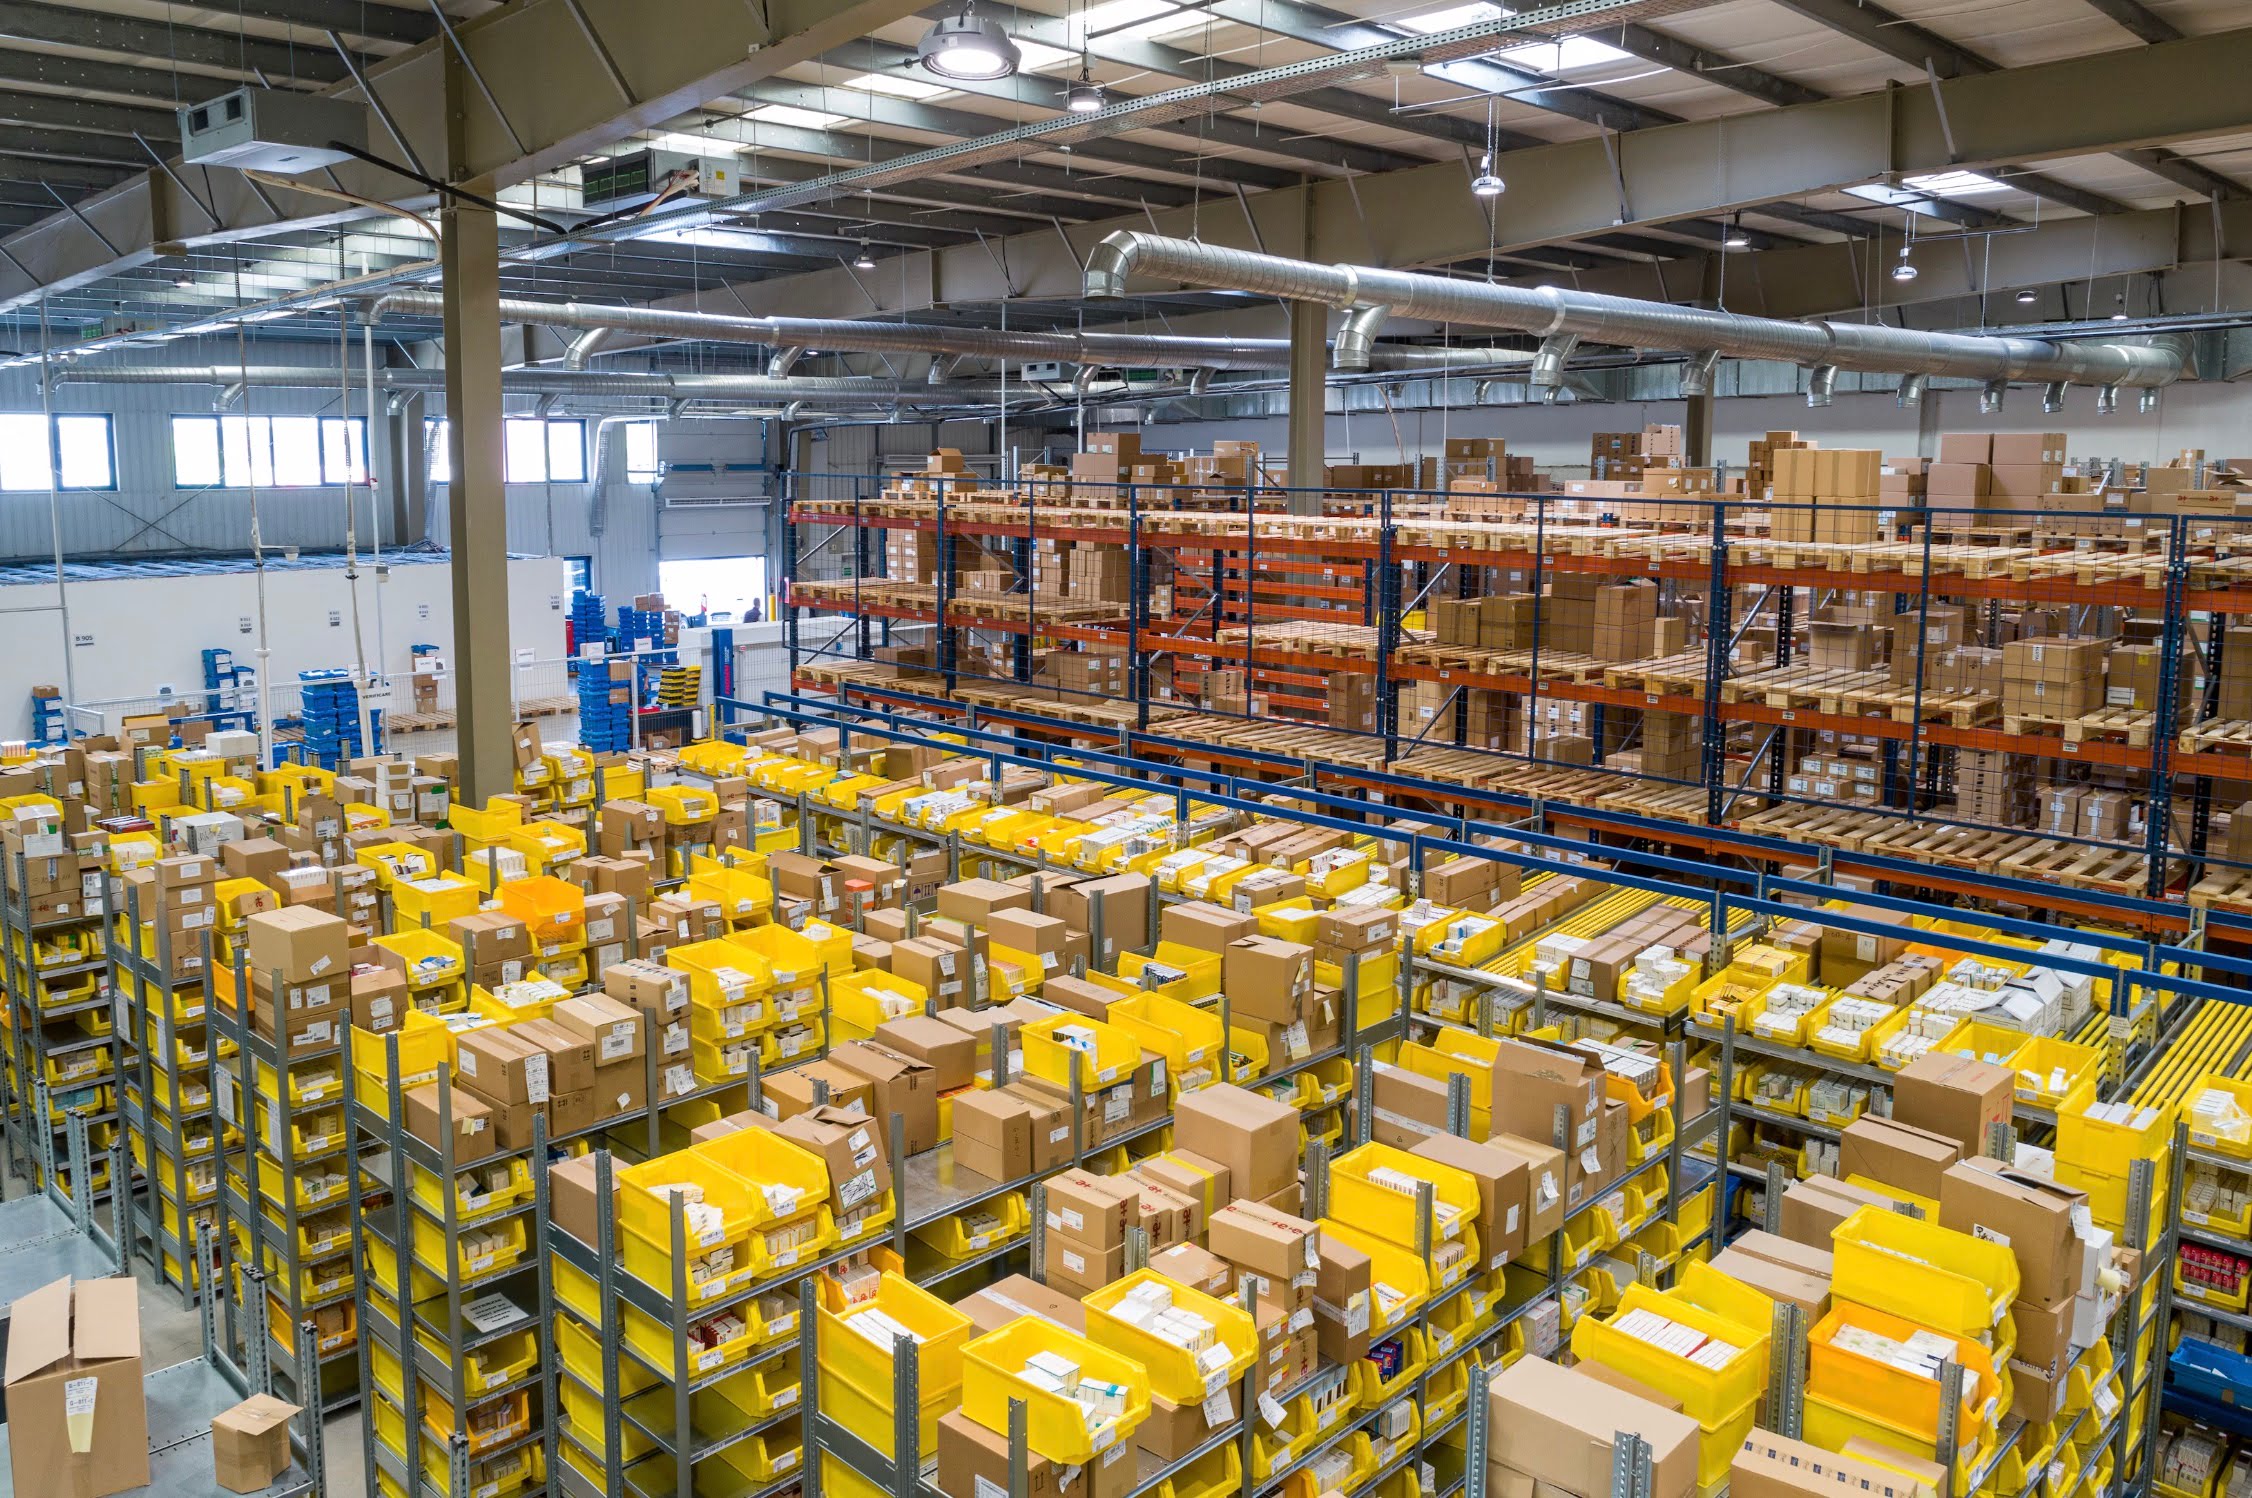 A top down shot of a fulfillment center warehouse similar to the Amazon FBA system